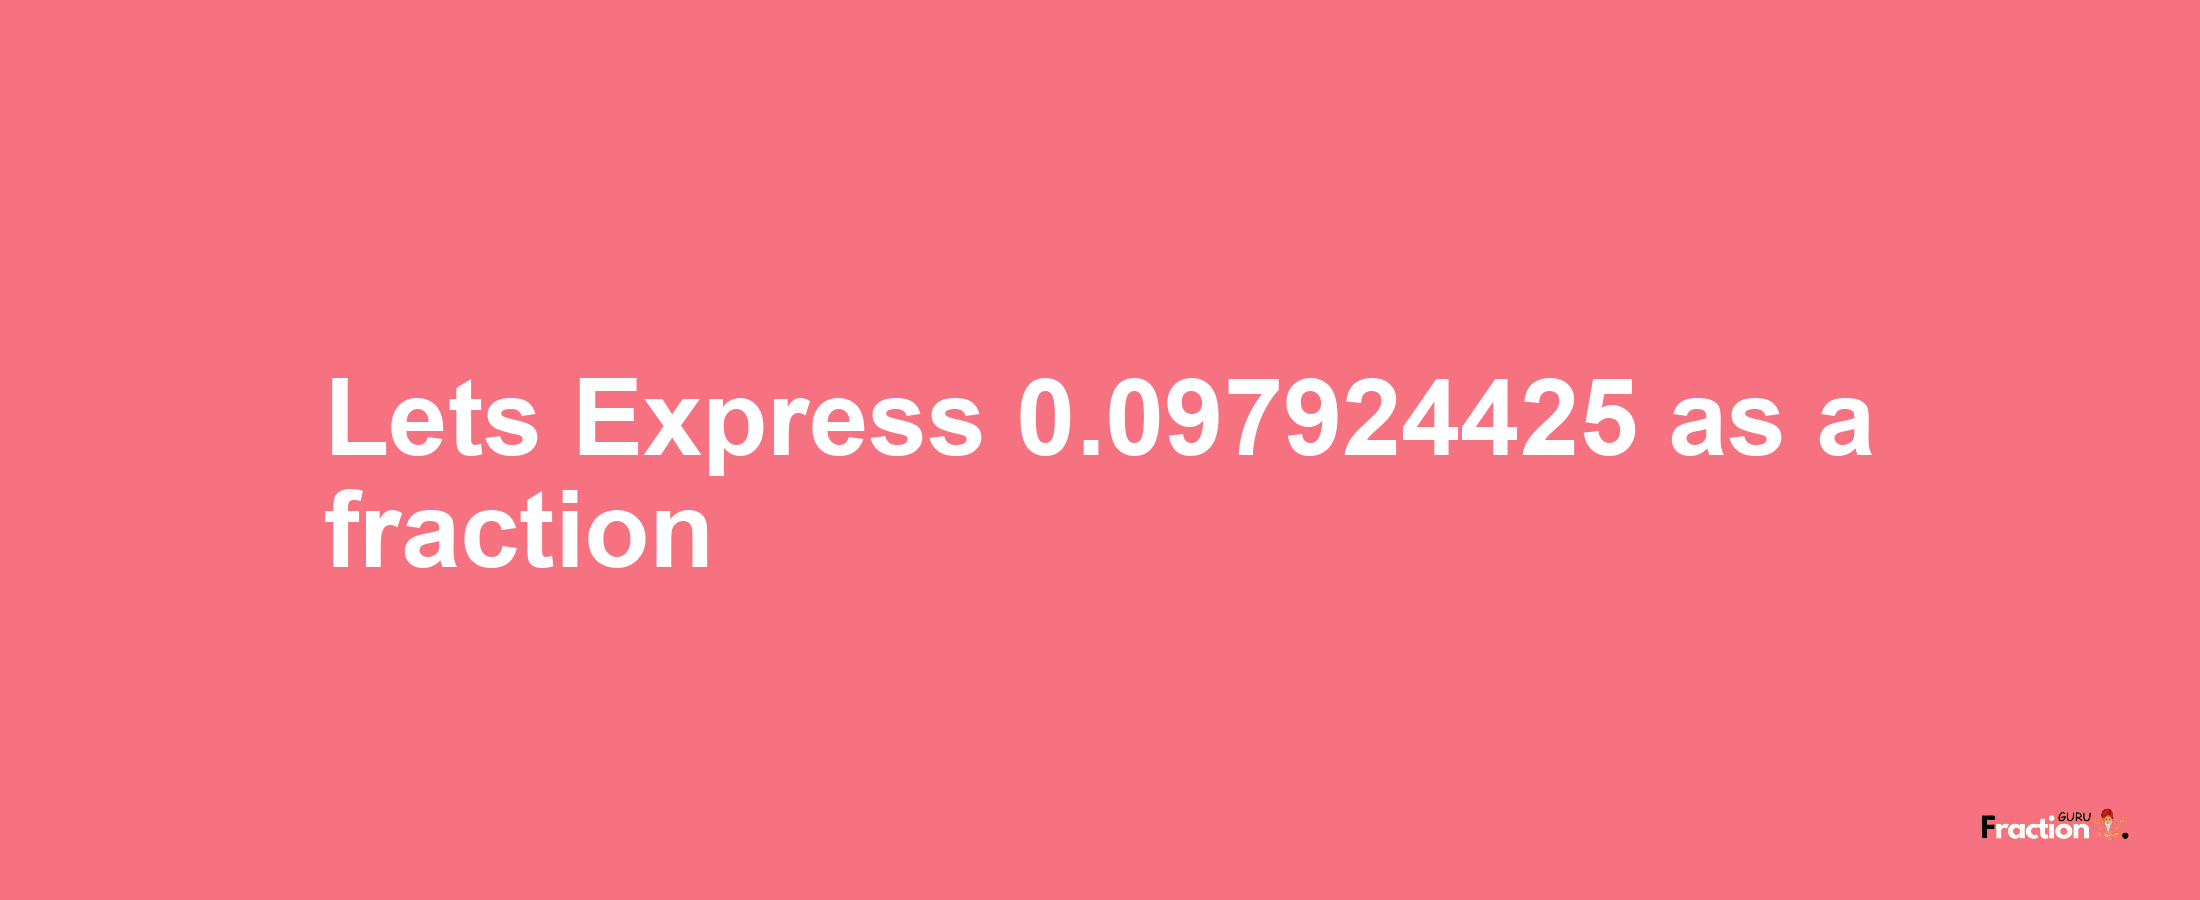 Lets Express 0.097924425 as afraction